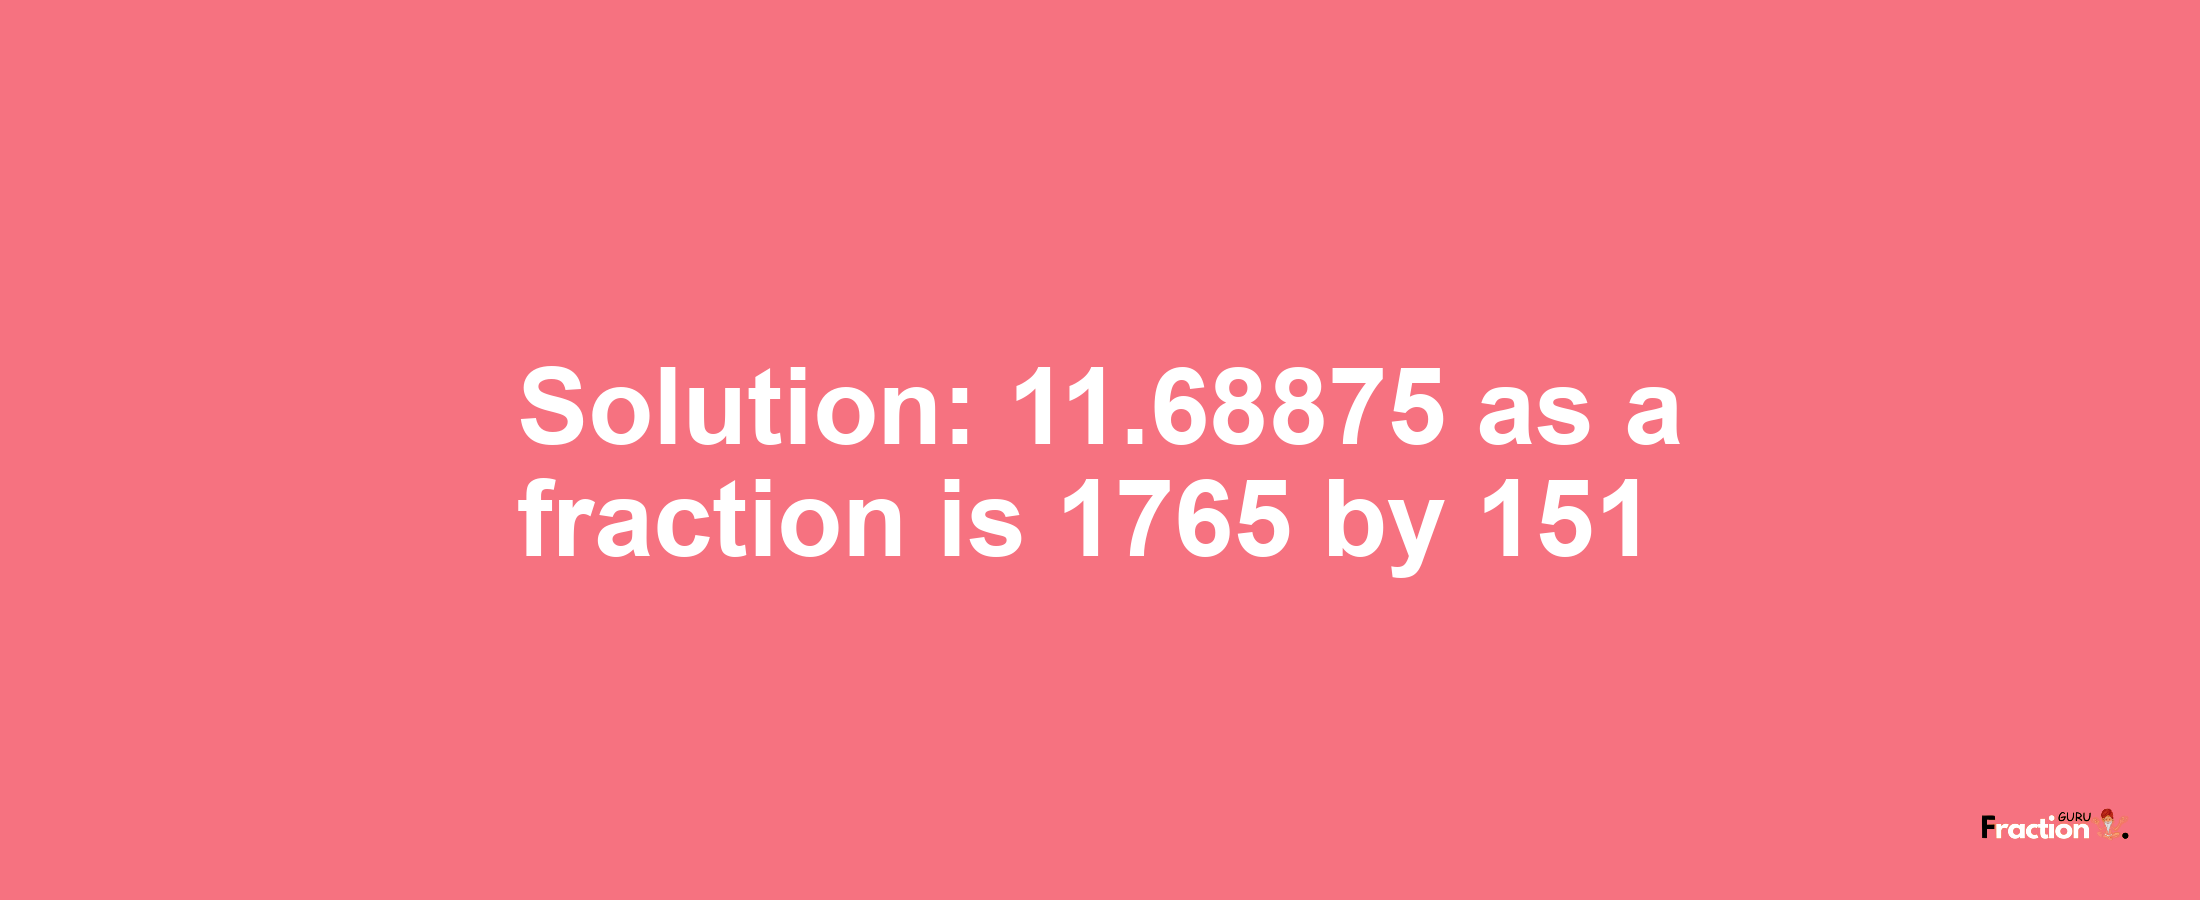 Solution:11.68875 as a fraction is 1765/151